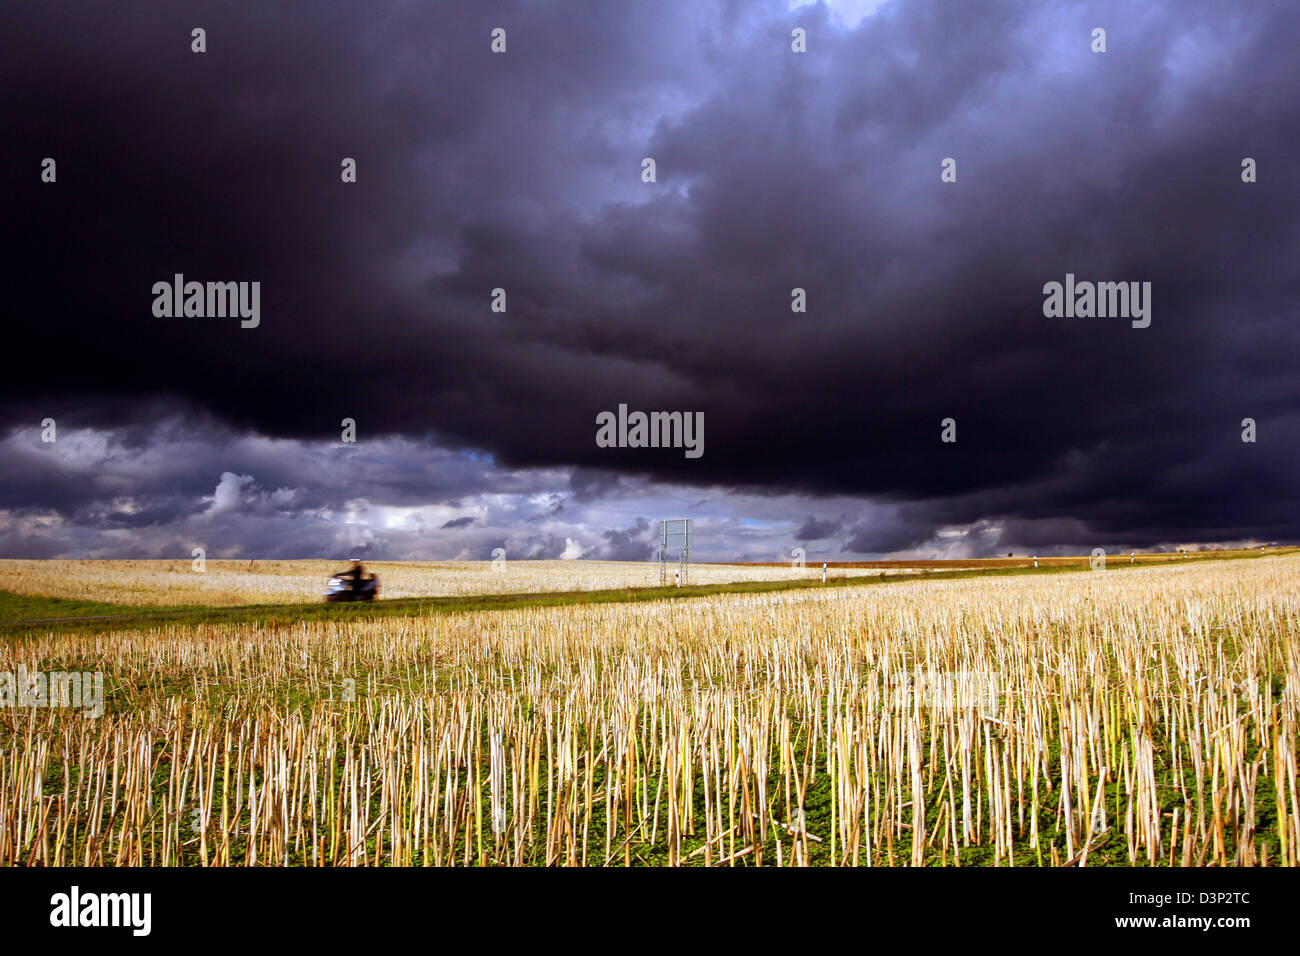 A scooterist passes a hay field under dark clouds near Hettstadt, Germany, Friday, 11 Augusrt 2006. Rain and cool temperatures around 17 degrees Celsius reign in the coming days. Photo: Karl-Josef Hildenbrand Stock Photo